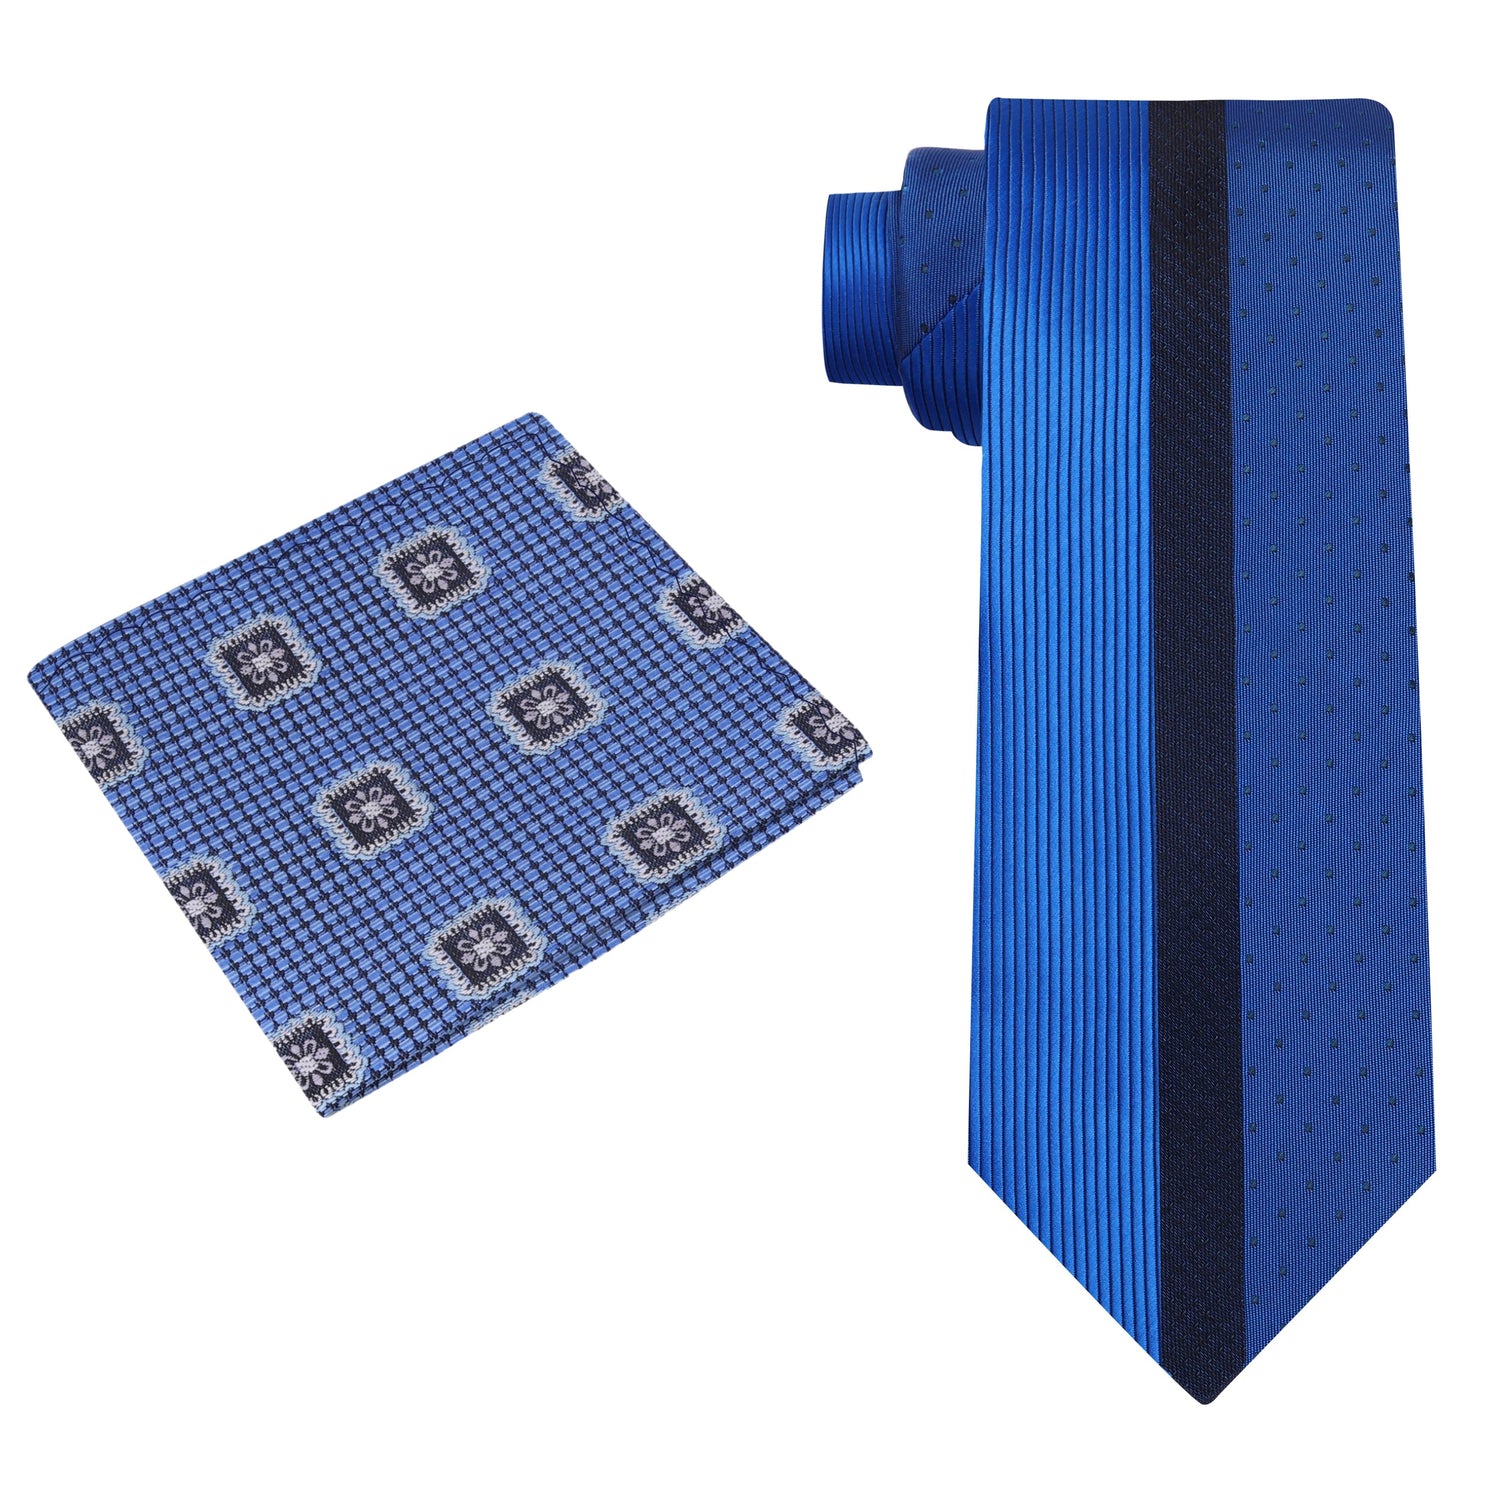 Alt View: Blue Silk Tie and Accenting Light Blue Geometric Square